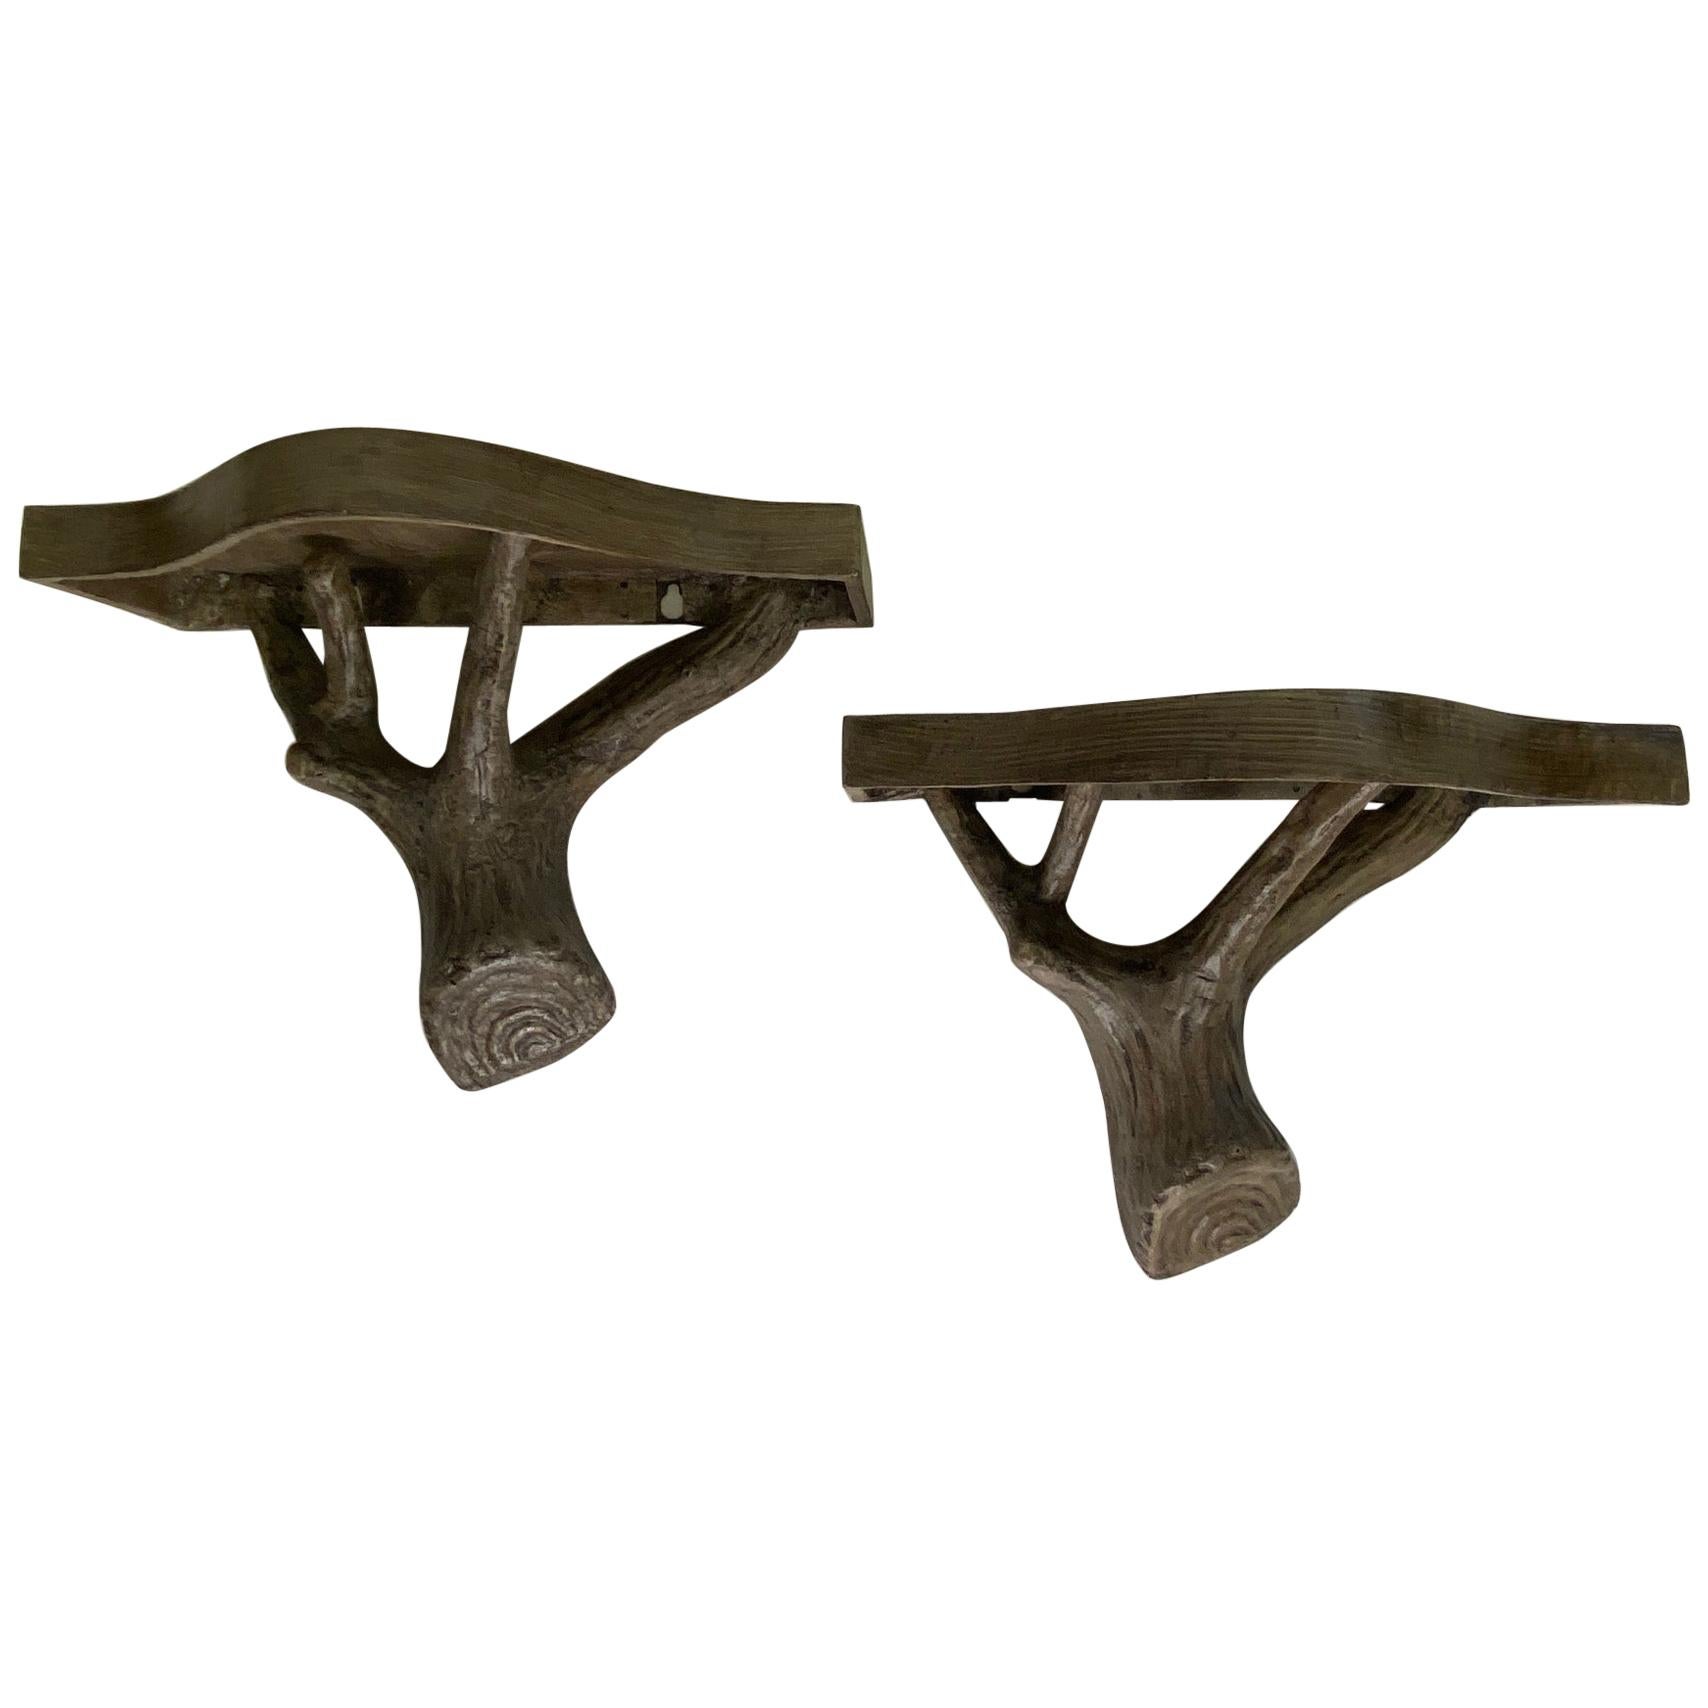 Handsome Pair of Organic Faux Bois Wall Brackets